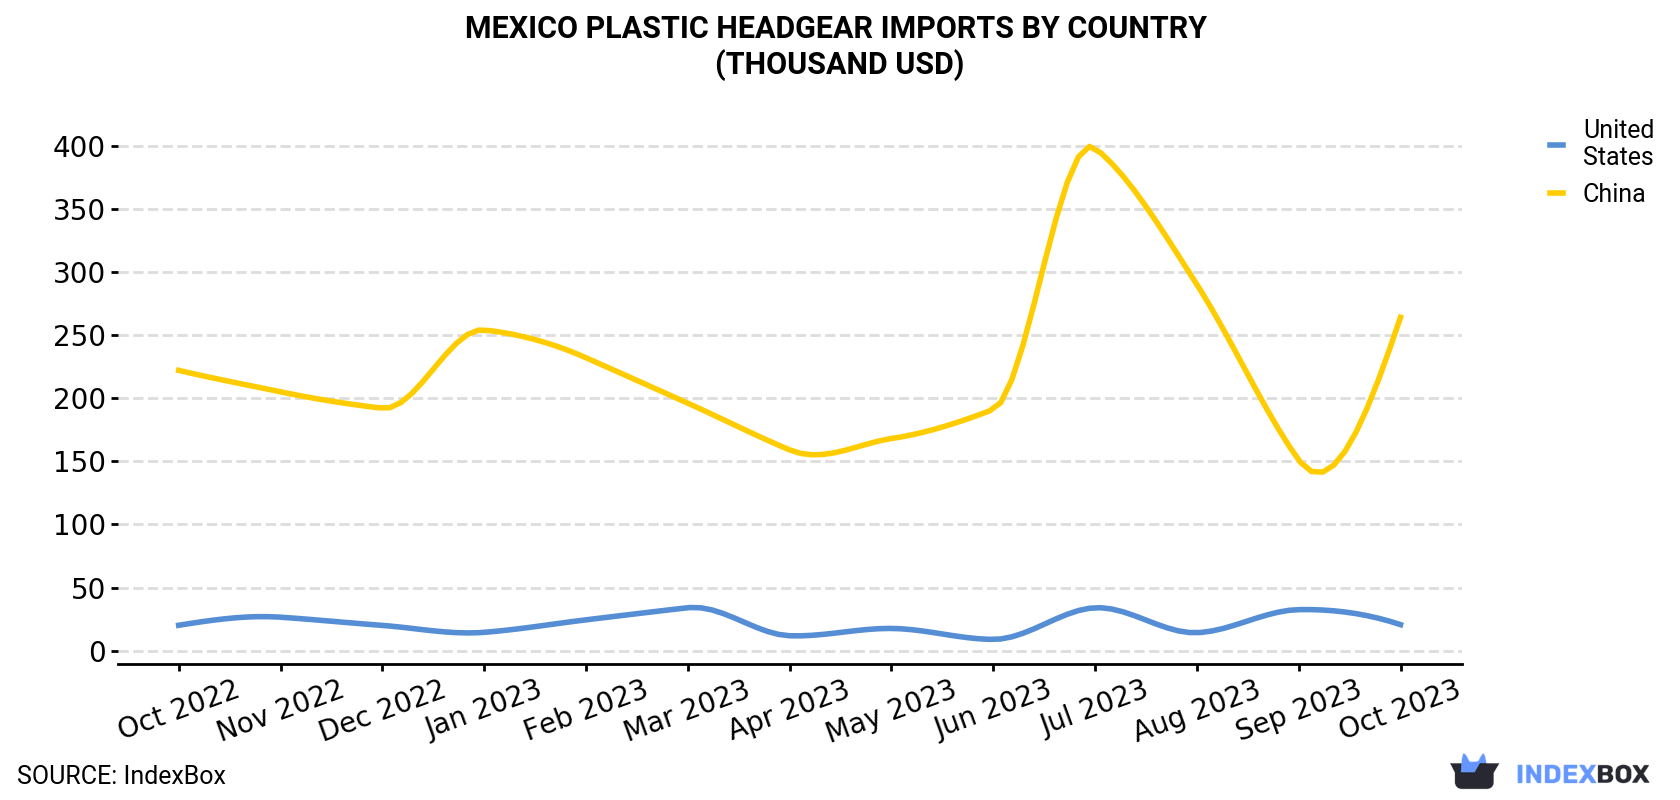 Mexico Plastic Headgear Imports By Country (Thousand USD)